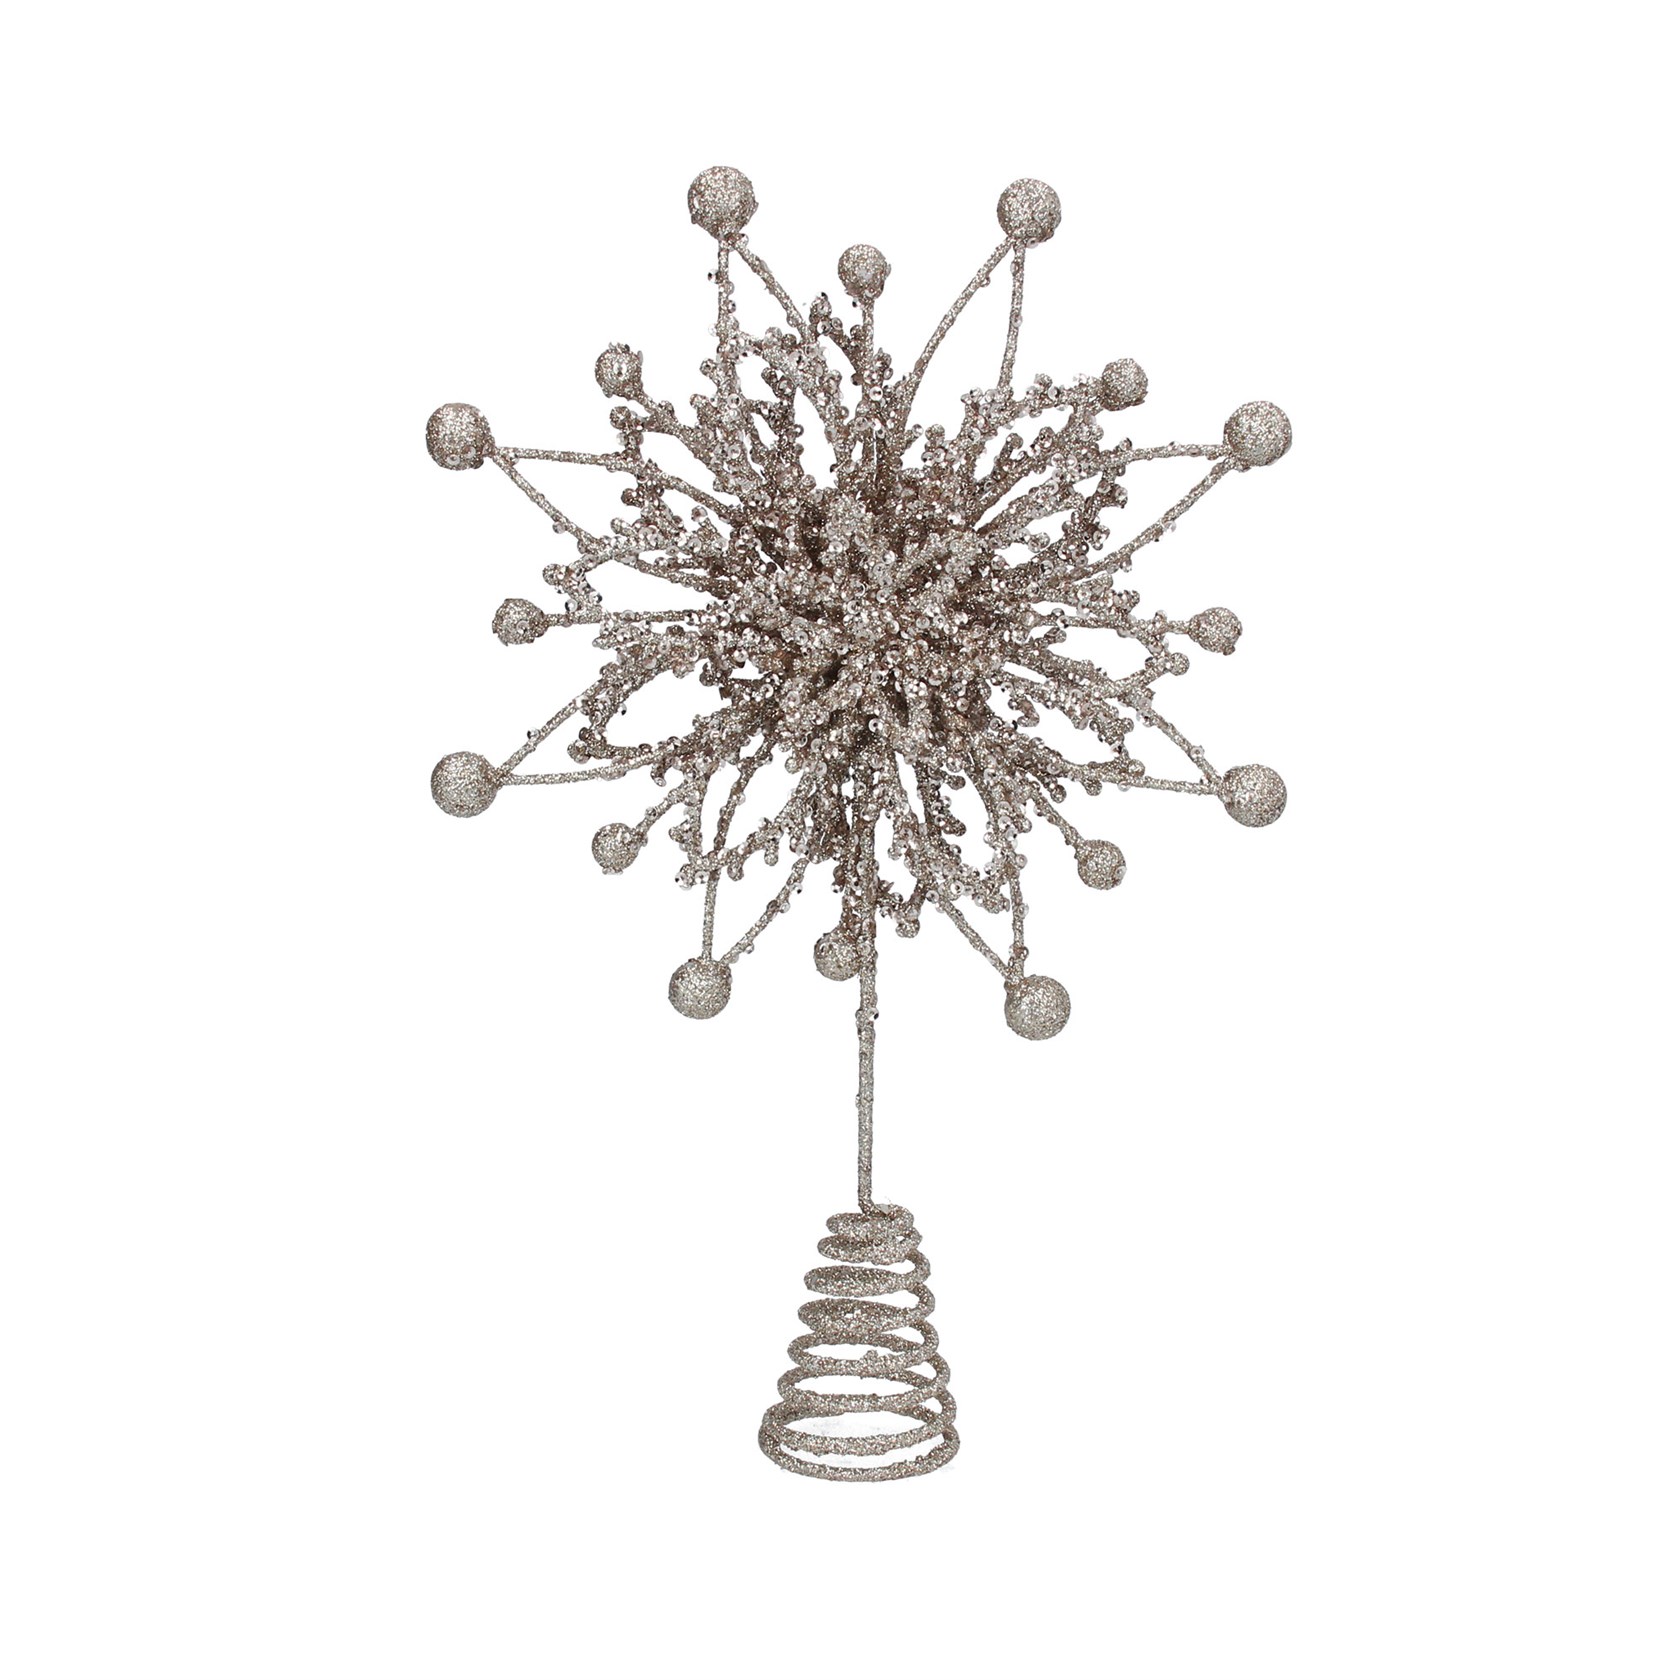 Pale gold wire snowflake Christmas tree topper. By Gisela Graham. The perfect festive addition to your home.